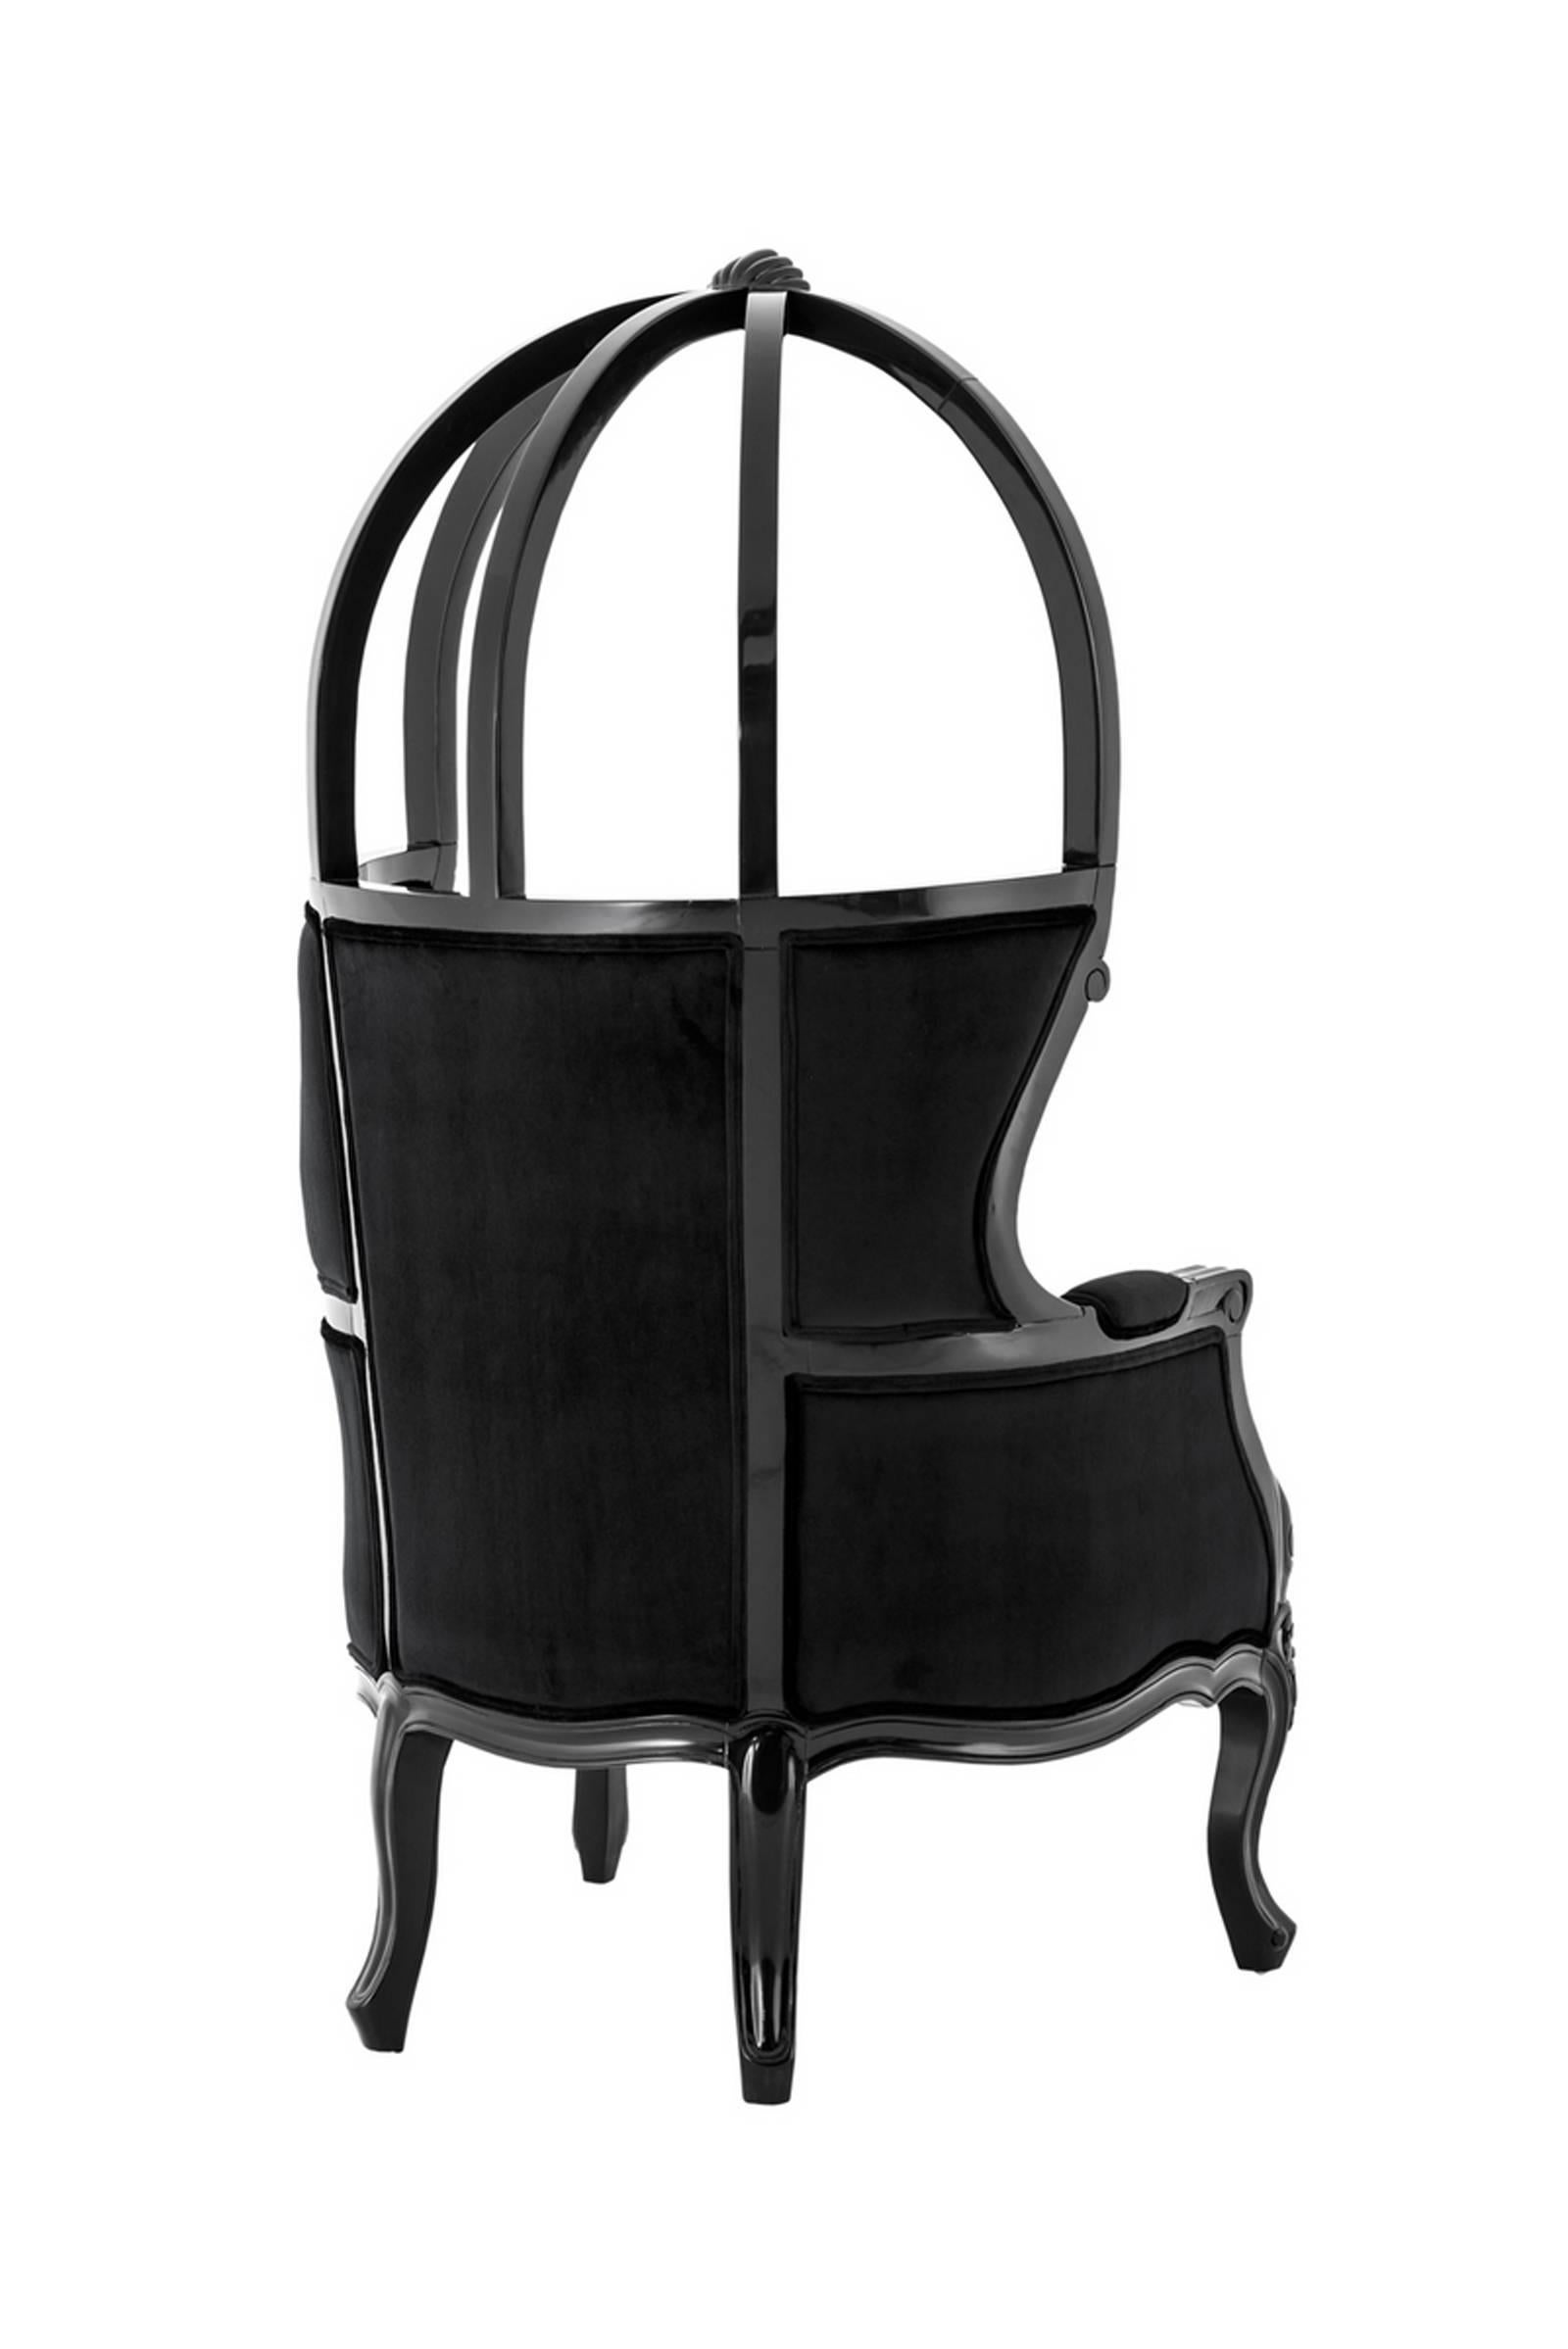 Armchair Buckingham with structure in
solid wood in black lacquered finish
and covered with black velvet.
     